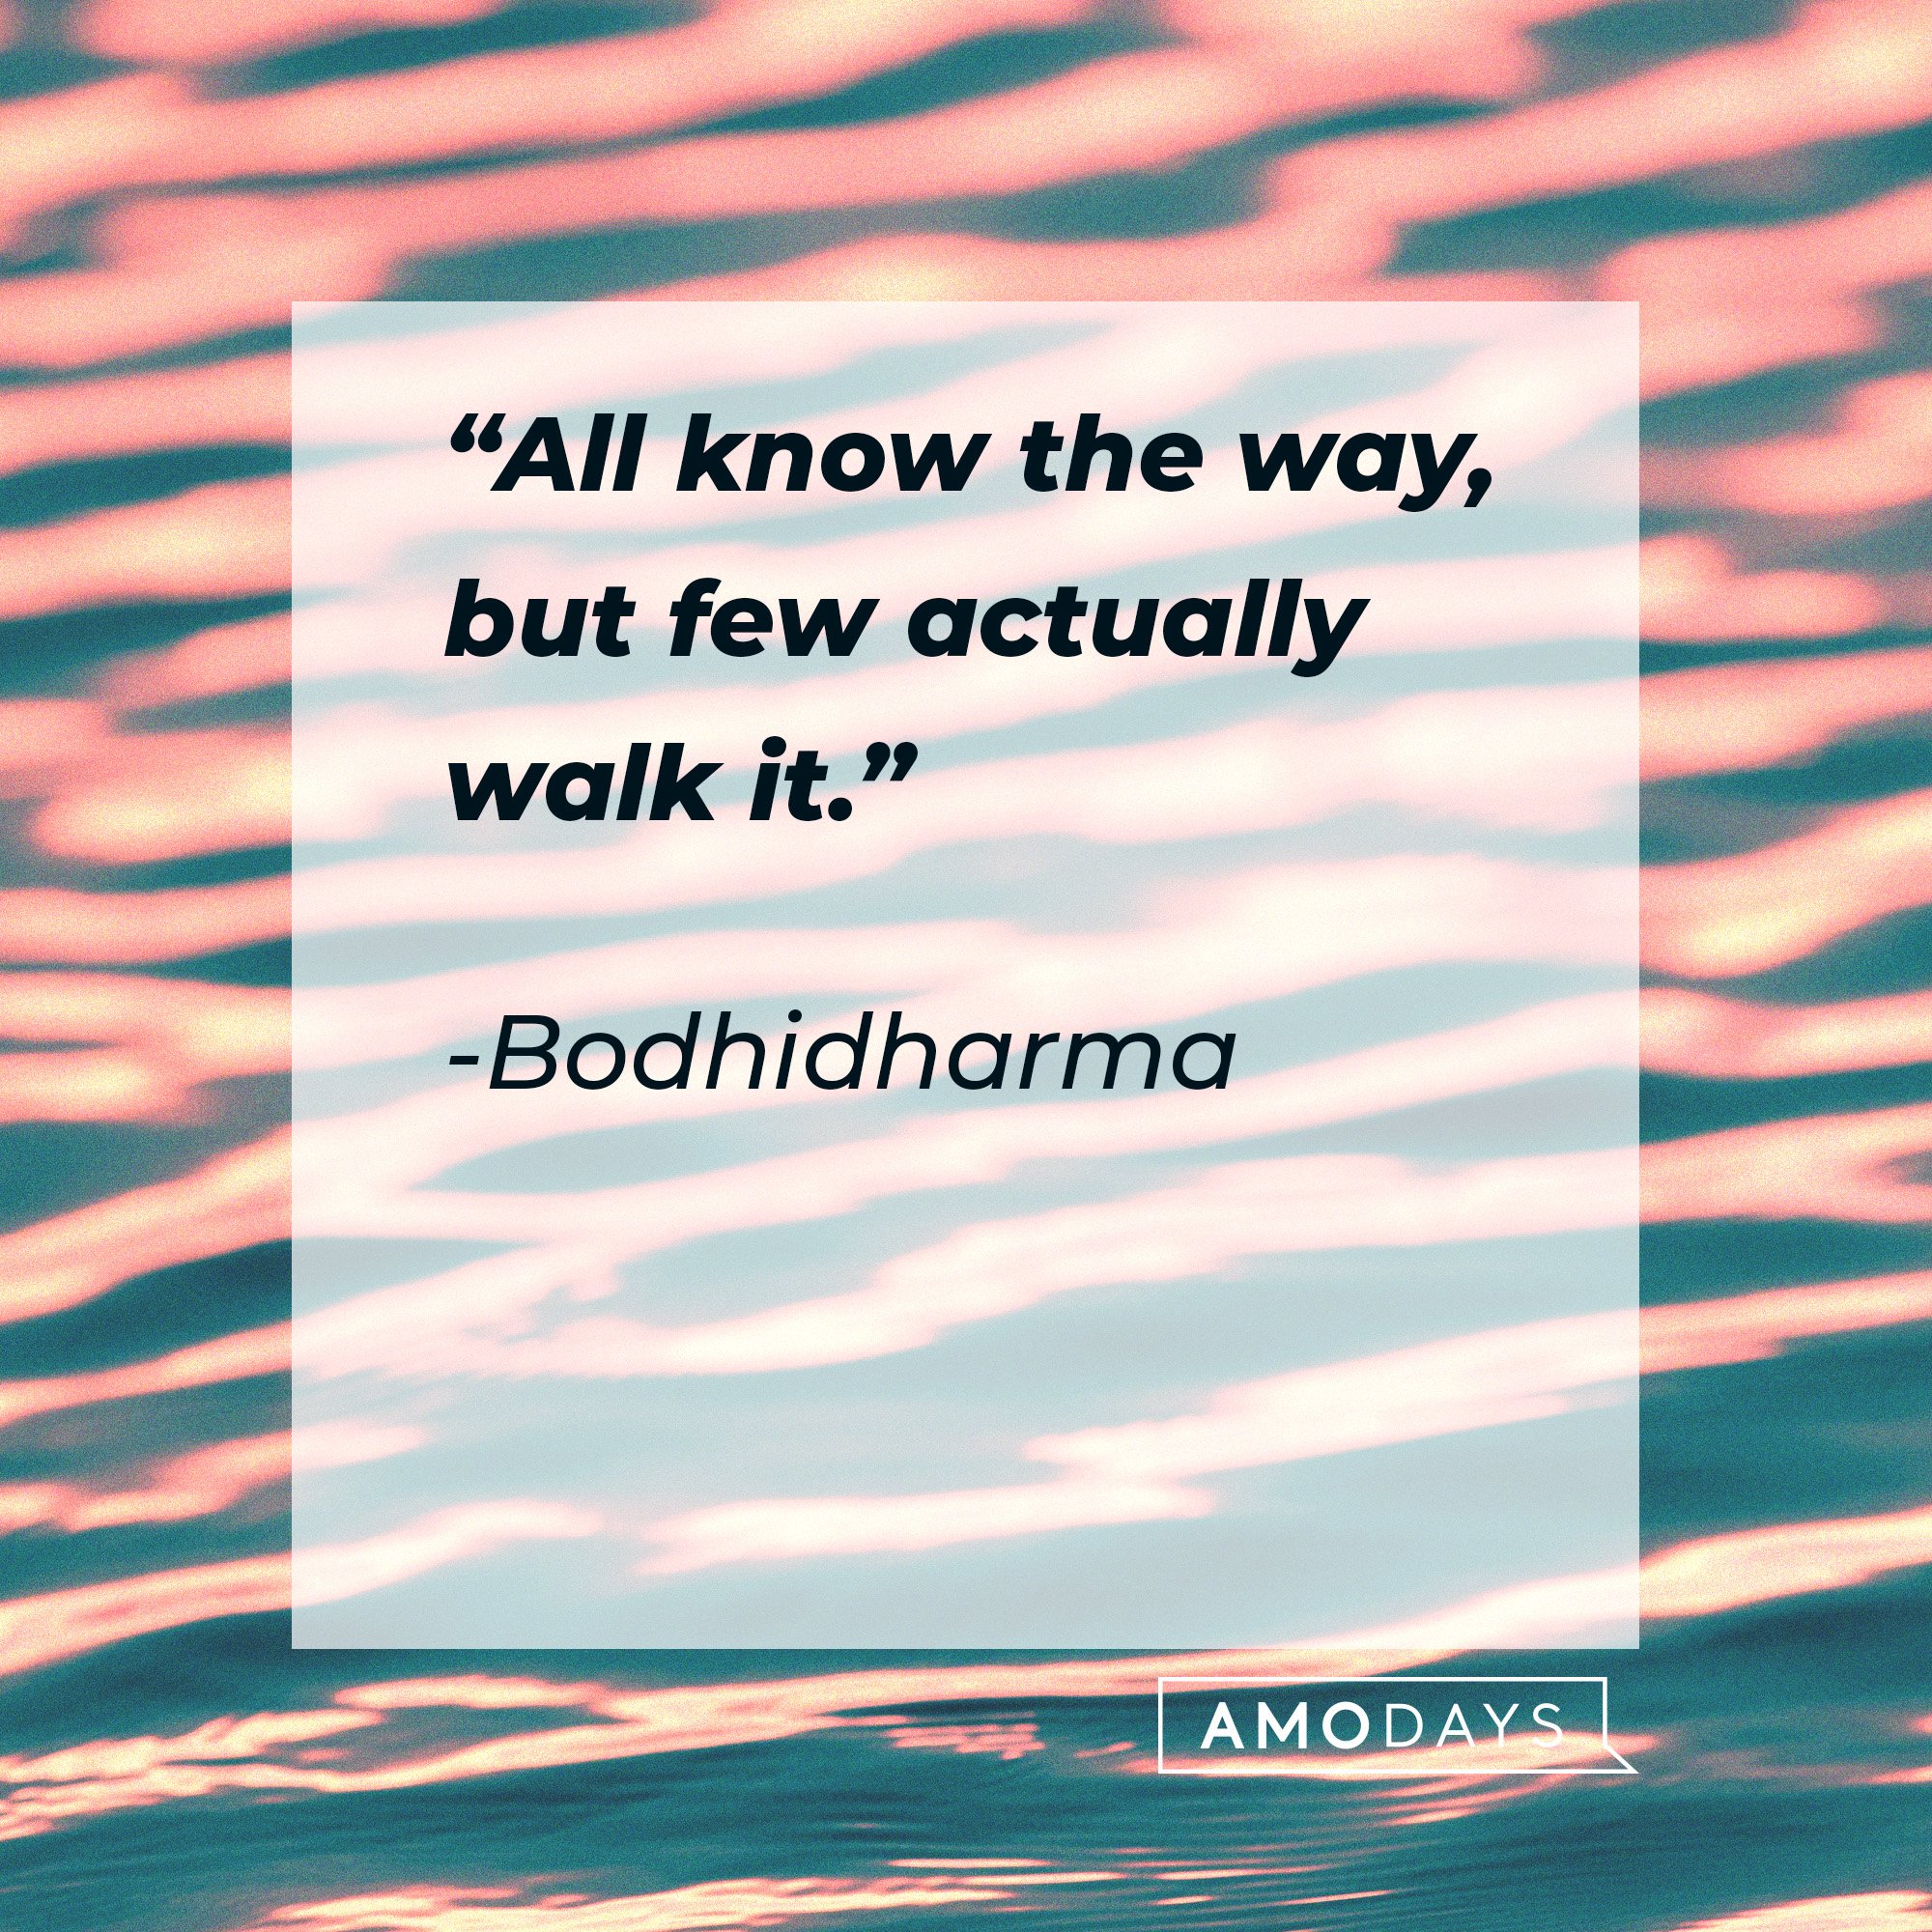  Bodhidharma's quote: “All know the way, but few actually walk it.” | Image: AmoDays